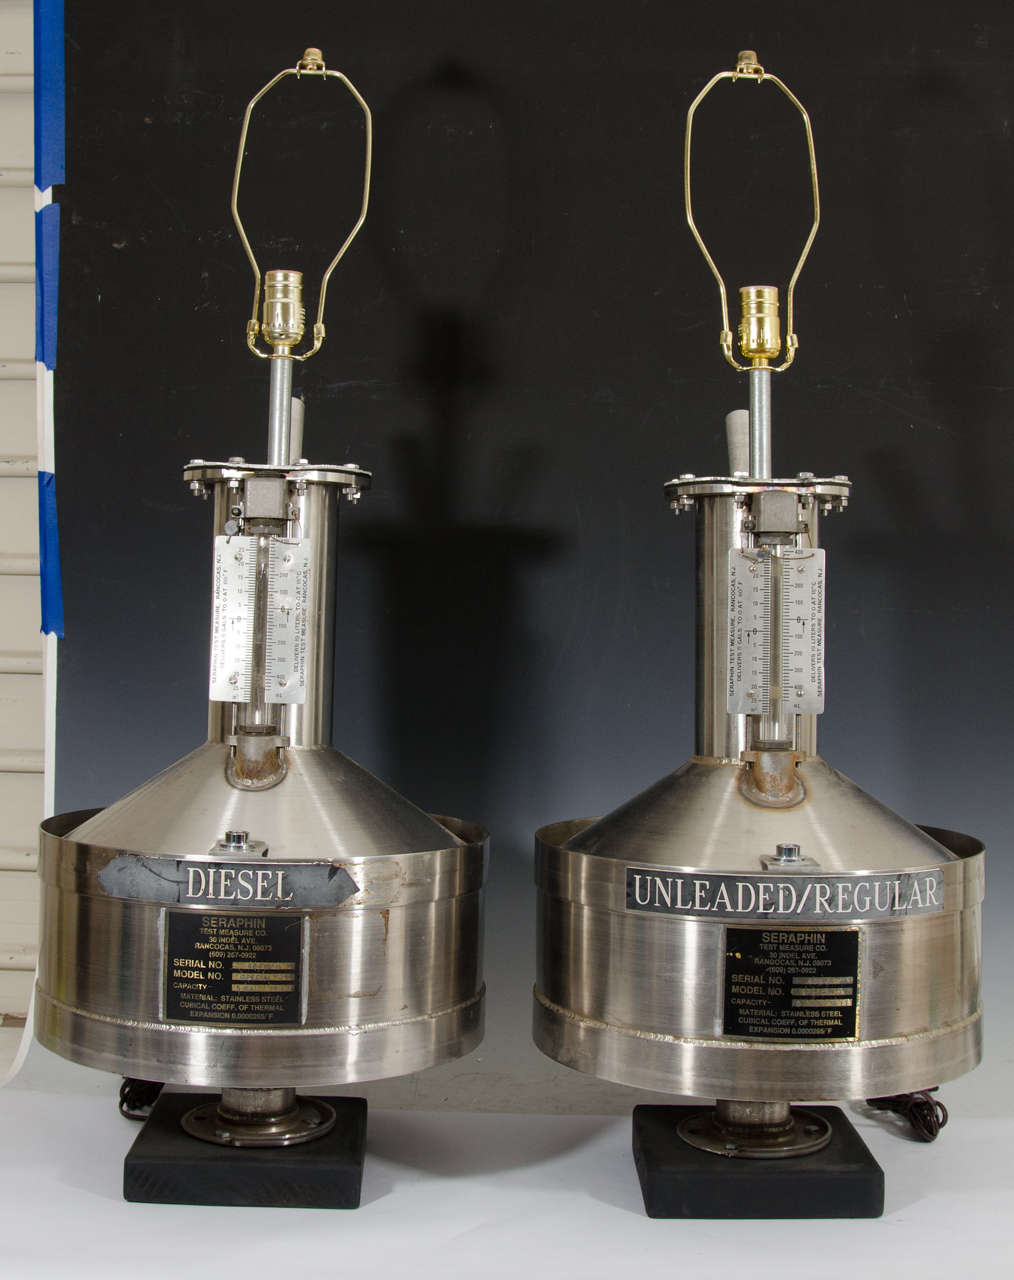 A pair of vintage Industrial style table lamps, crafted, circa 1970s from stainless steel gas tanks, with original Seraphin Test Measure Co. labels; one is diesel, the other is unleaded or regular. Good vintage condition with age appropriate patina,